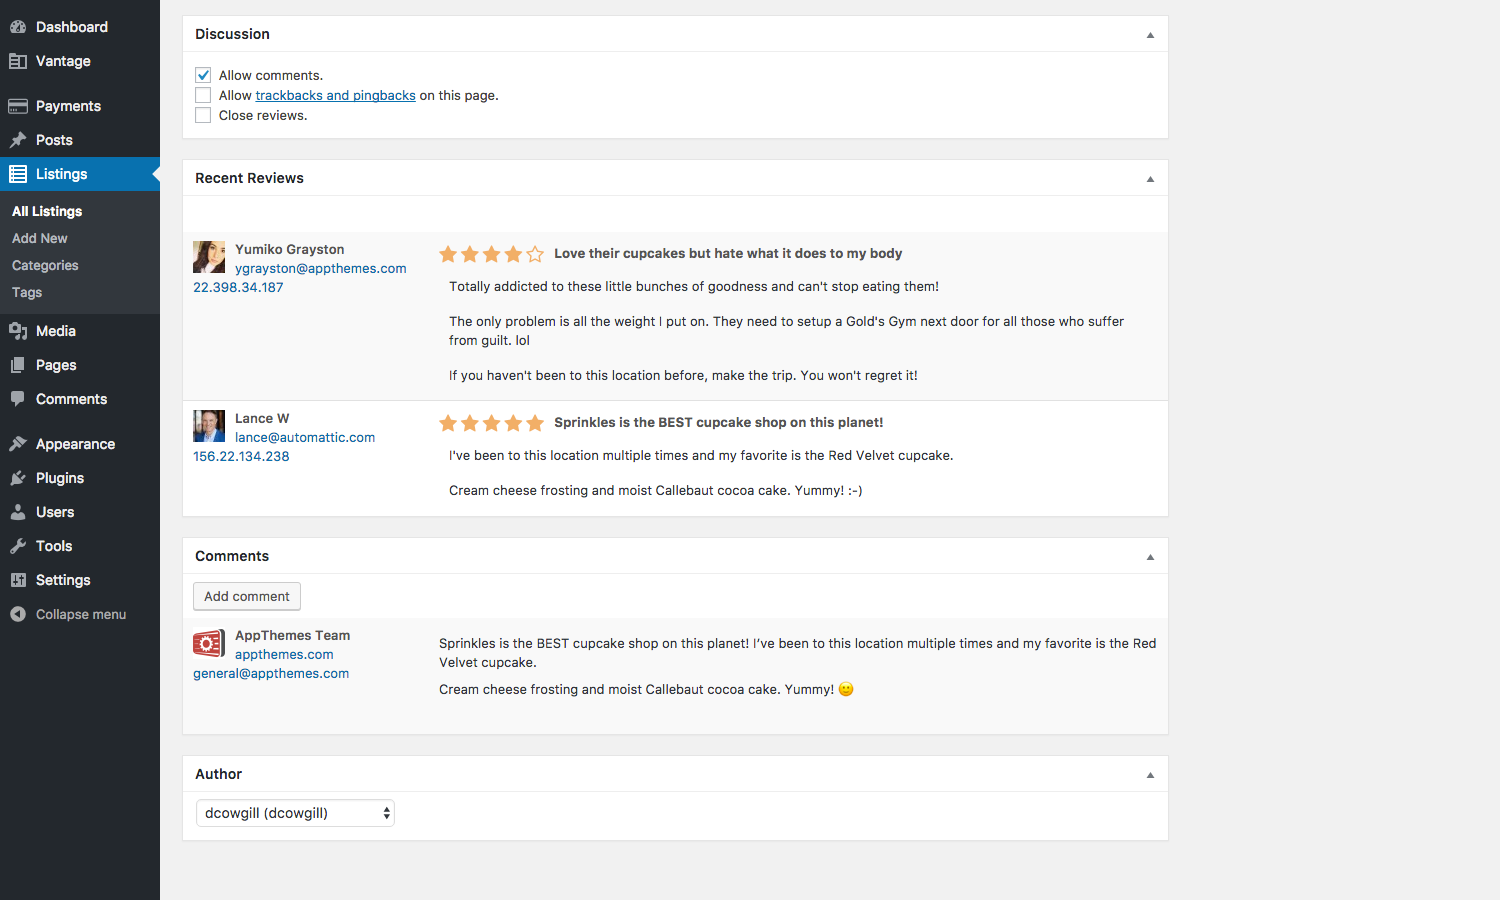 View all and close reviews on the post edit screen.